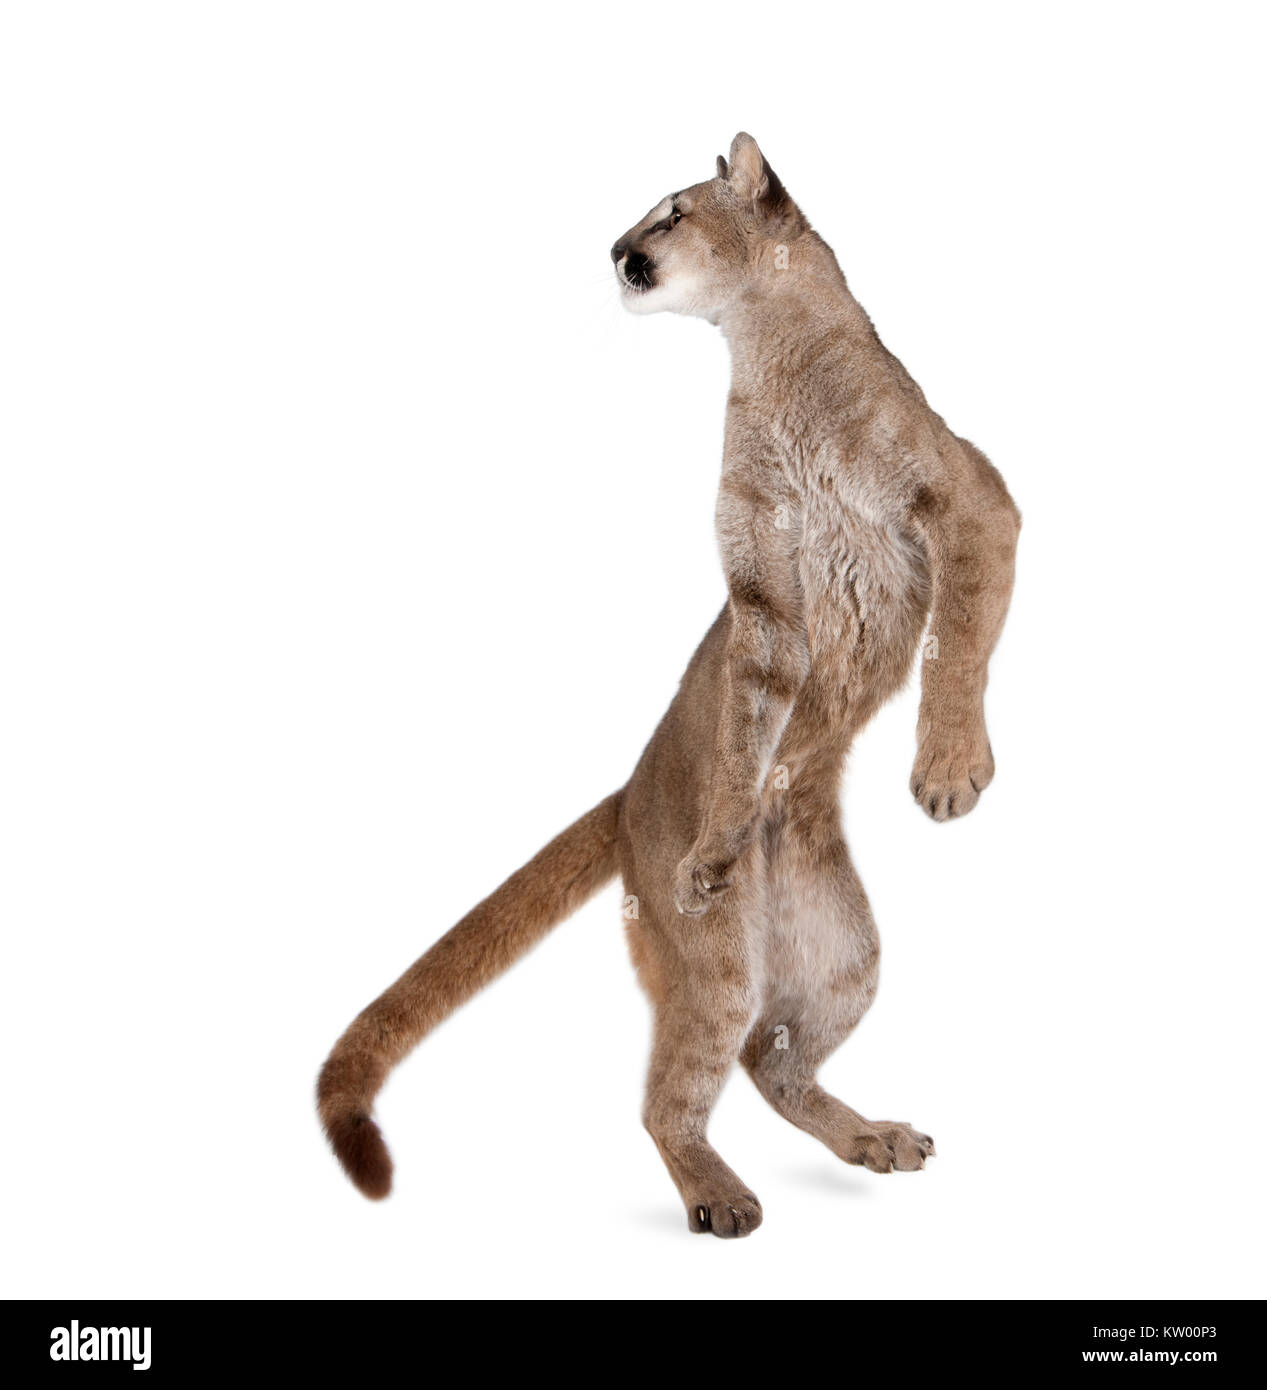 Puma cub, Puma concolor, 1 year old, standing on hind legs and looking against background, studio shot Stock Photo - Alamy